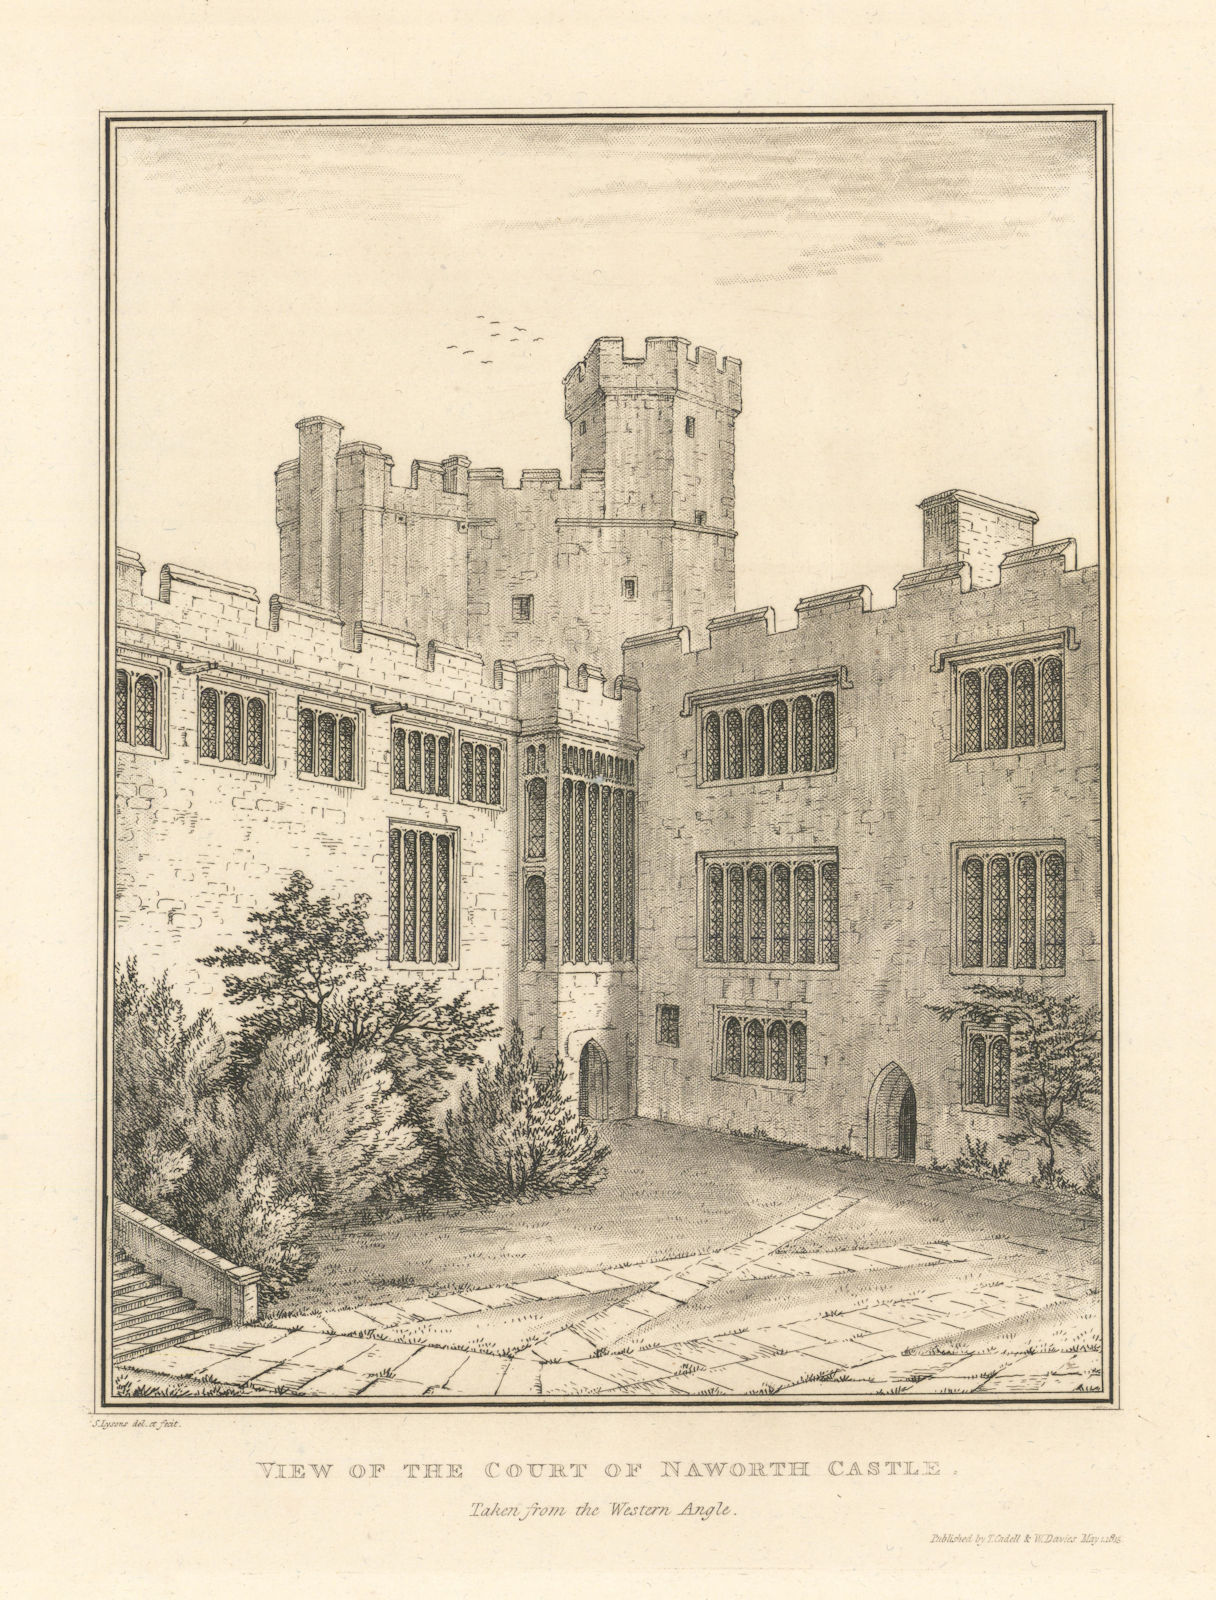 View of the Court of Naworth Castle, Cumbria by Samuel Lysons 1816 old print